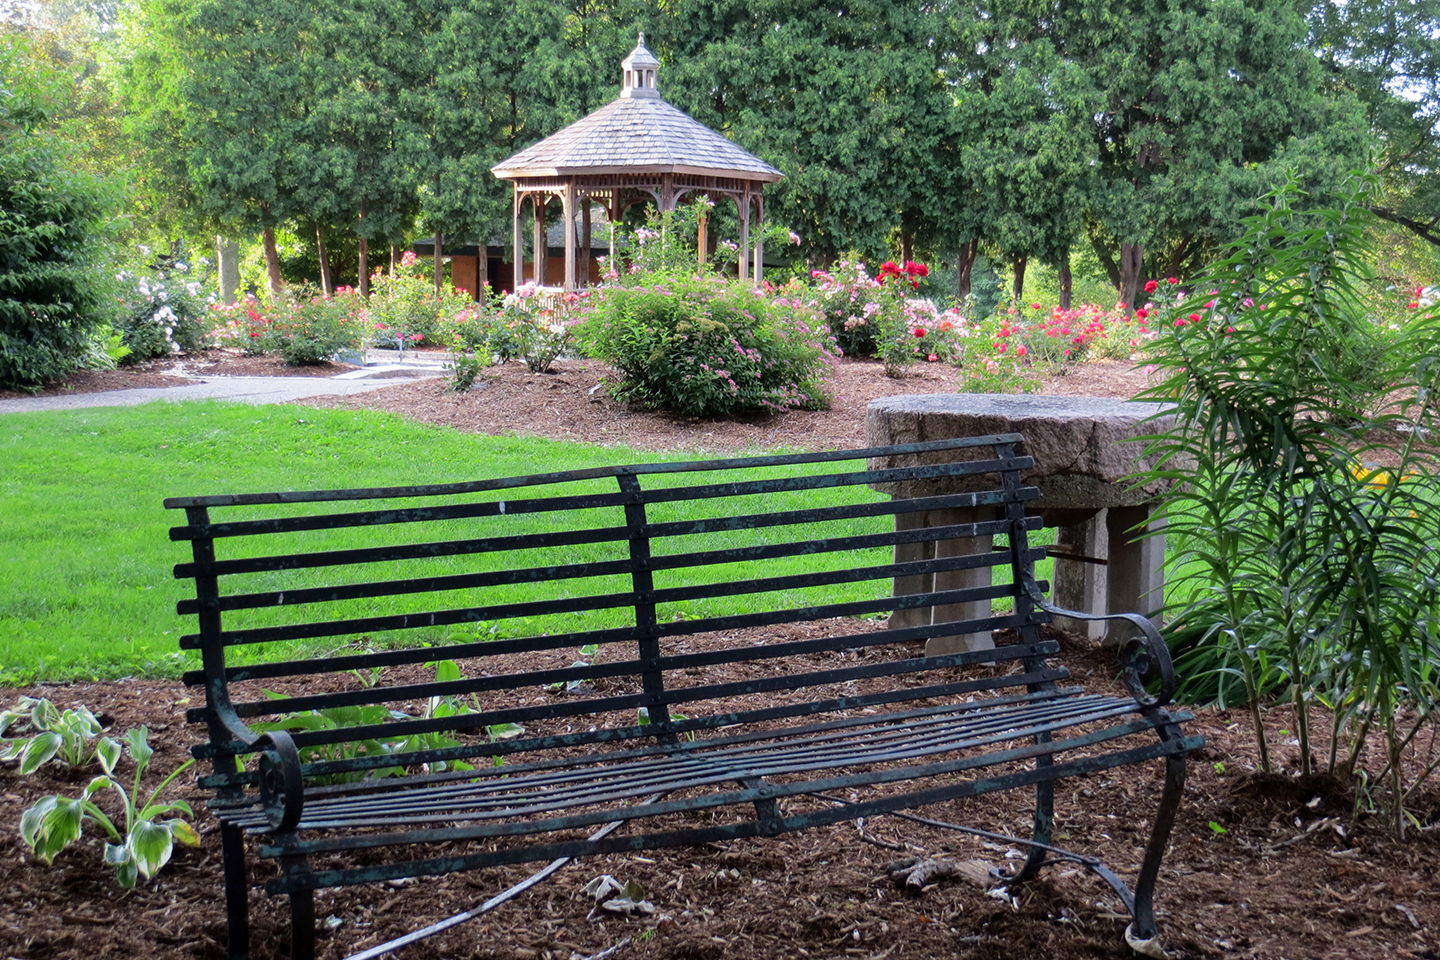 weed park bench and gazebo with trees and grass